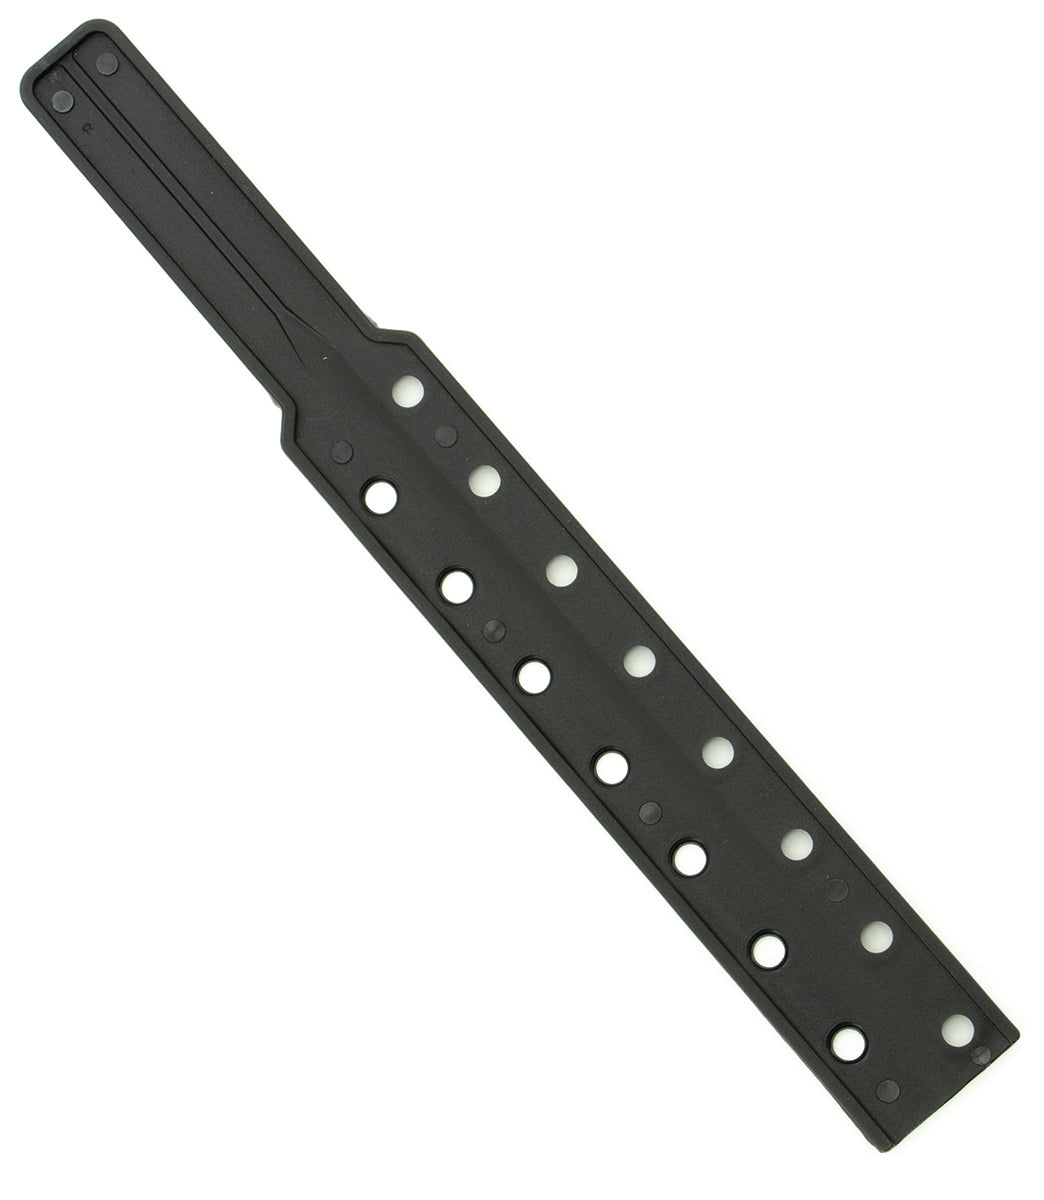 5pc Paint Paddle, Plastic with Holes Made in America